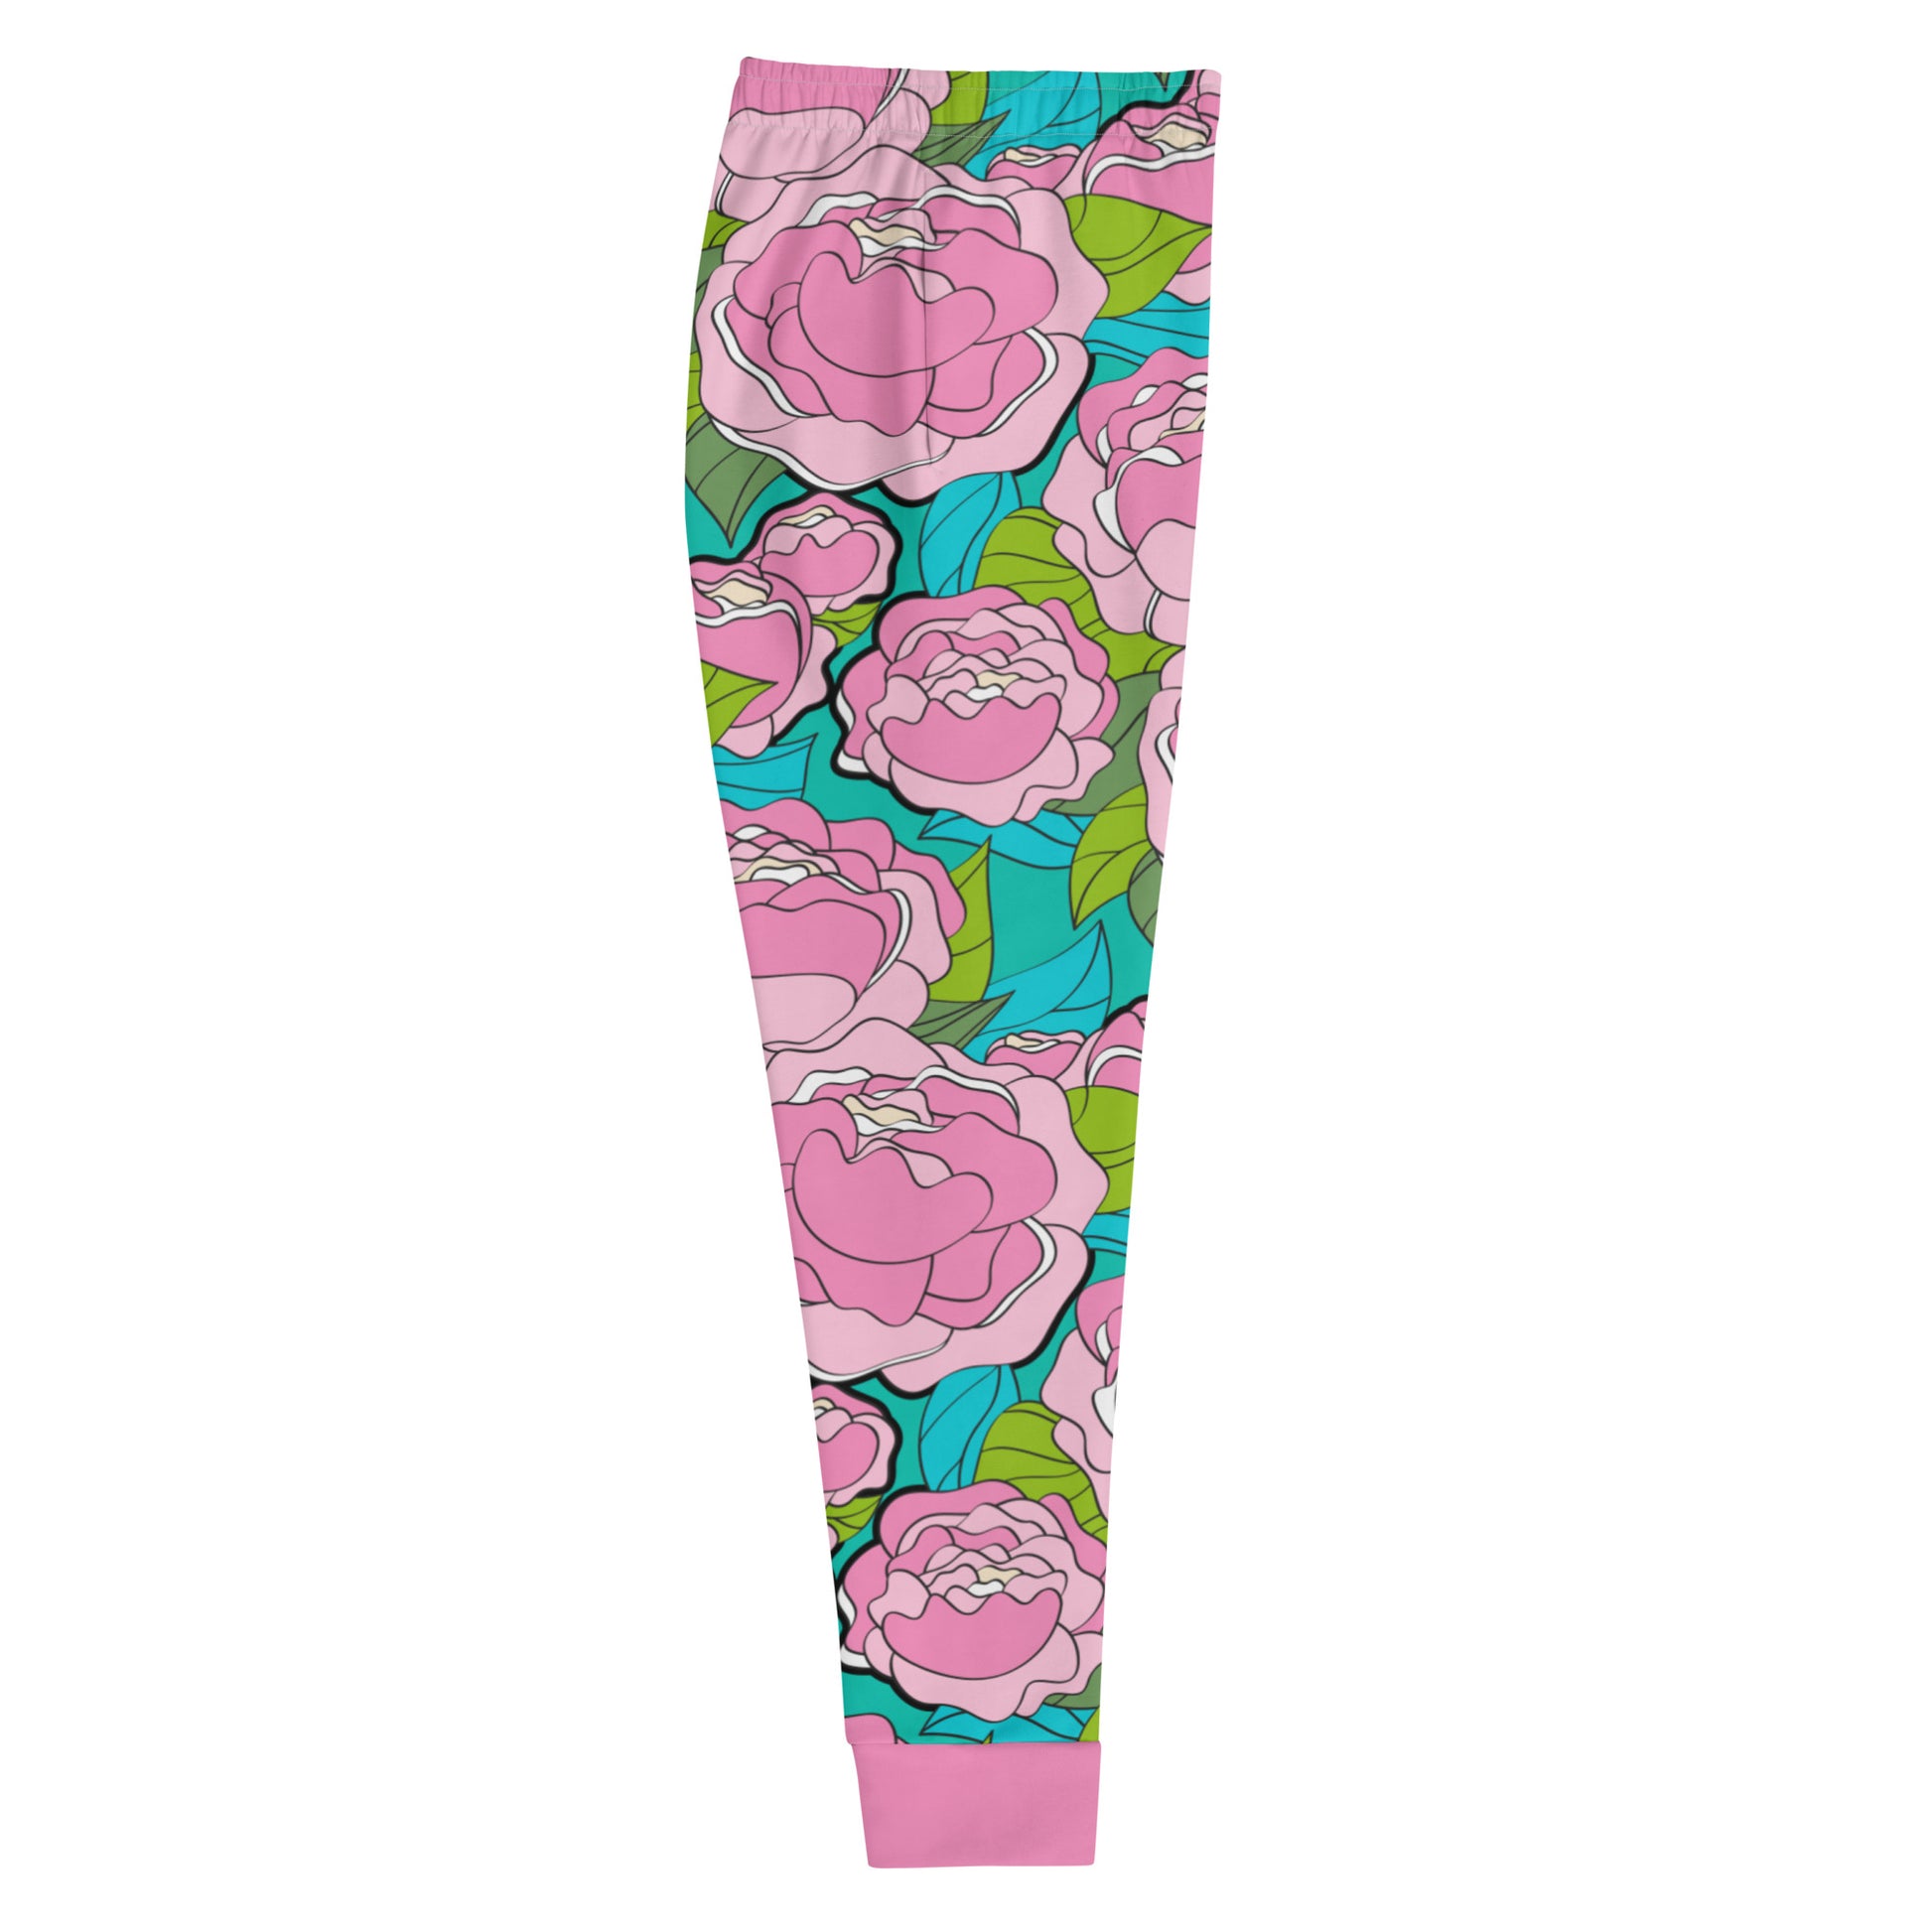 BE MY ONLY pink turquoise - Women's Sweatpants